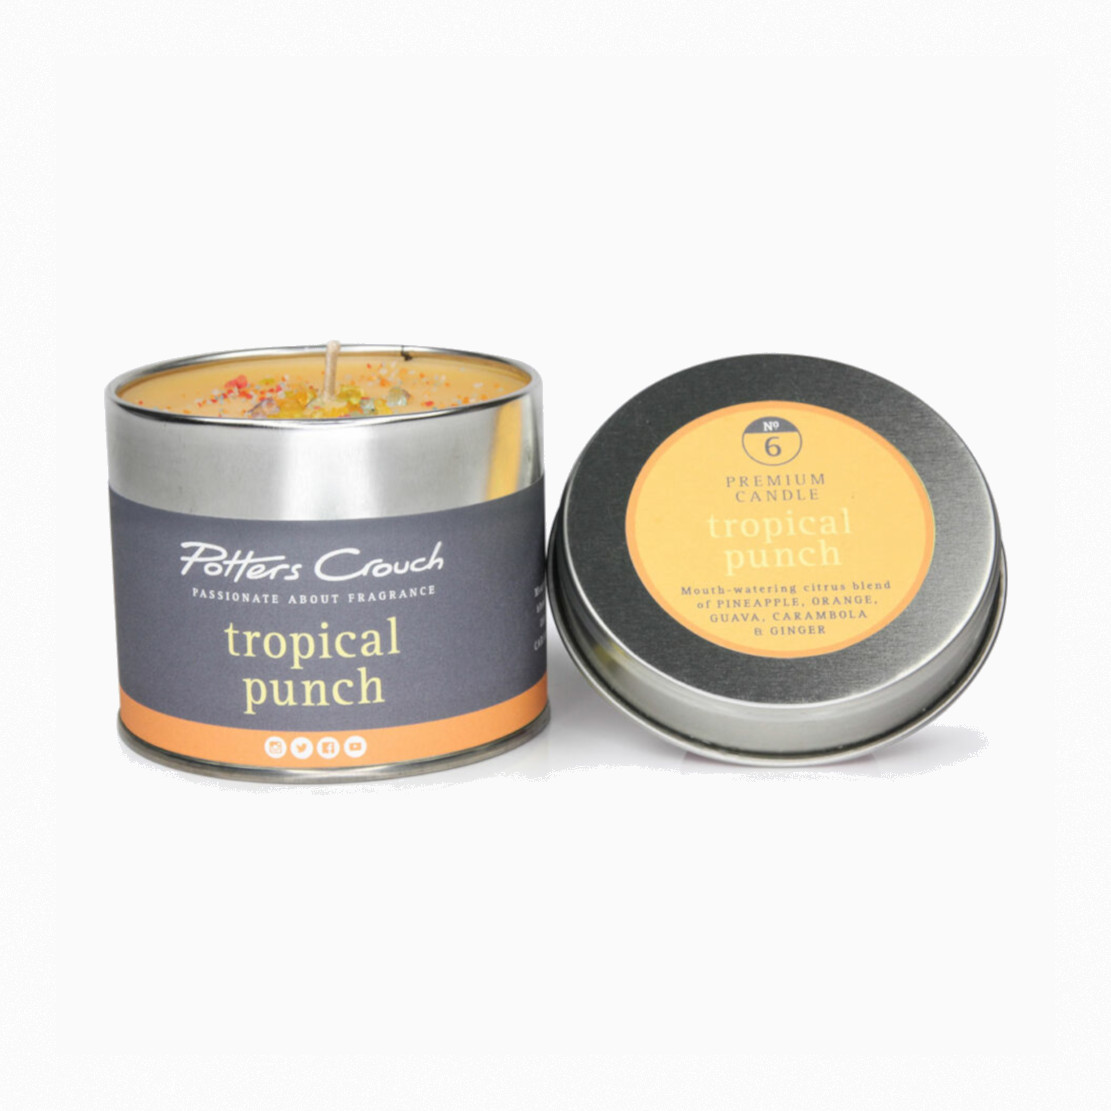 Potters Crouch Tropical Punch Tin Candle